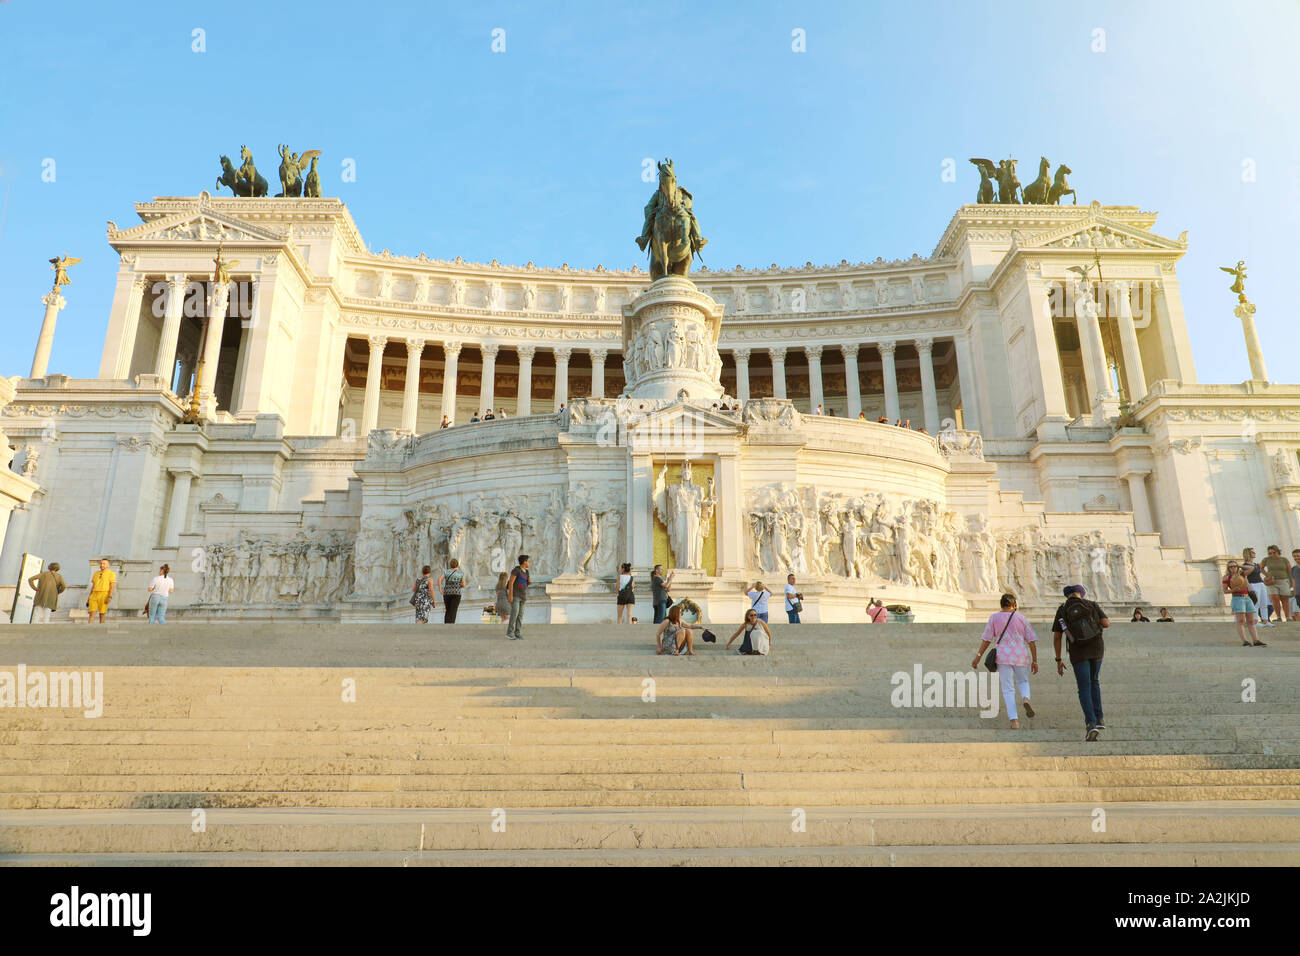 ROME, ITALY - SEPTEMBER 16, 2019: Sunset view of the Altar of the Fatherland (Altare della Patria) in Rome, Italy. Stock Photo